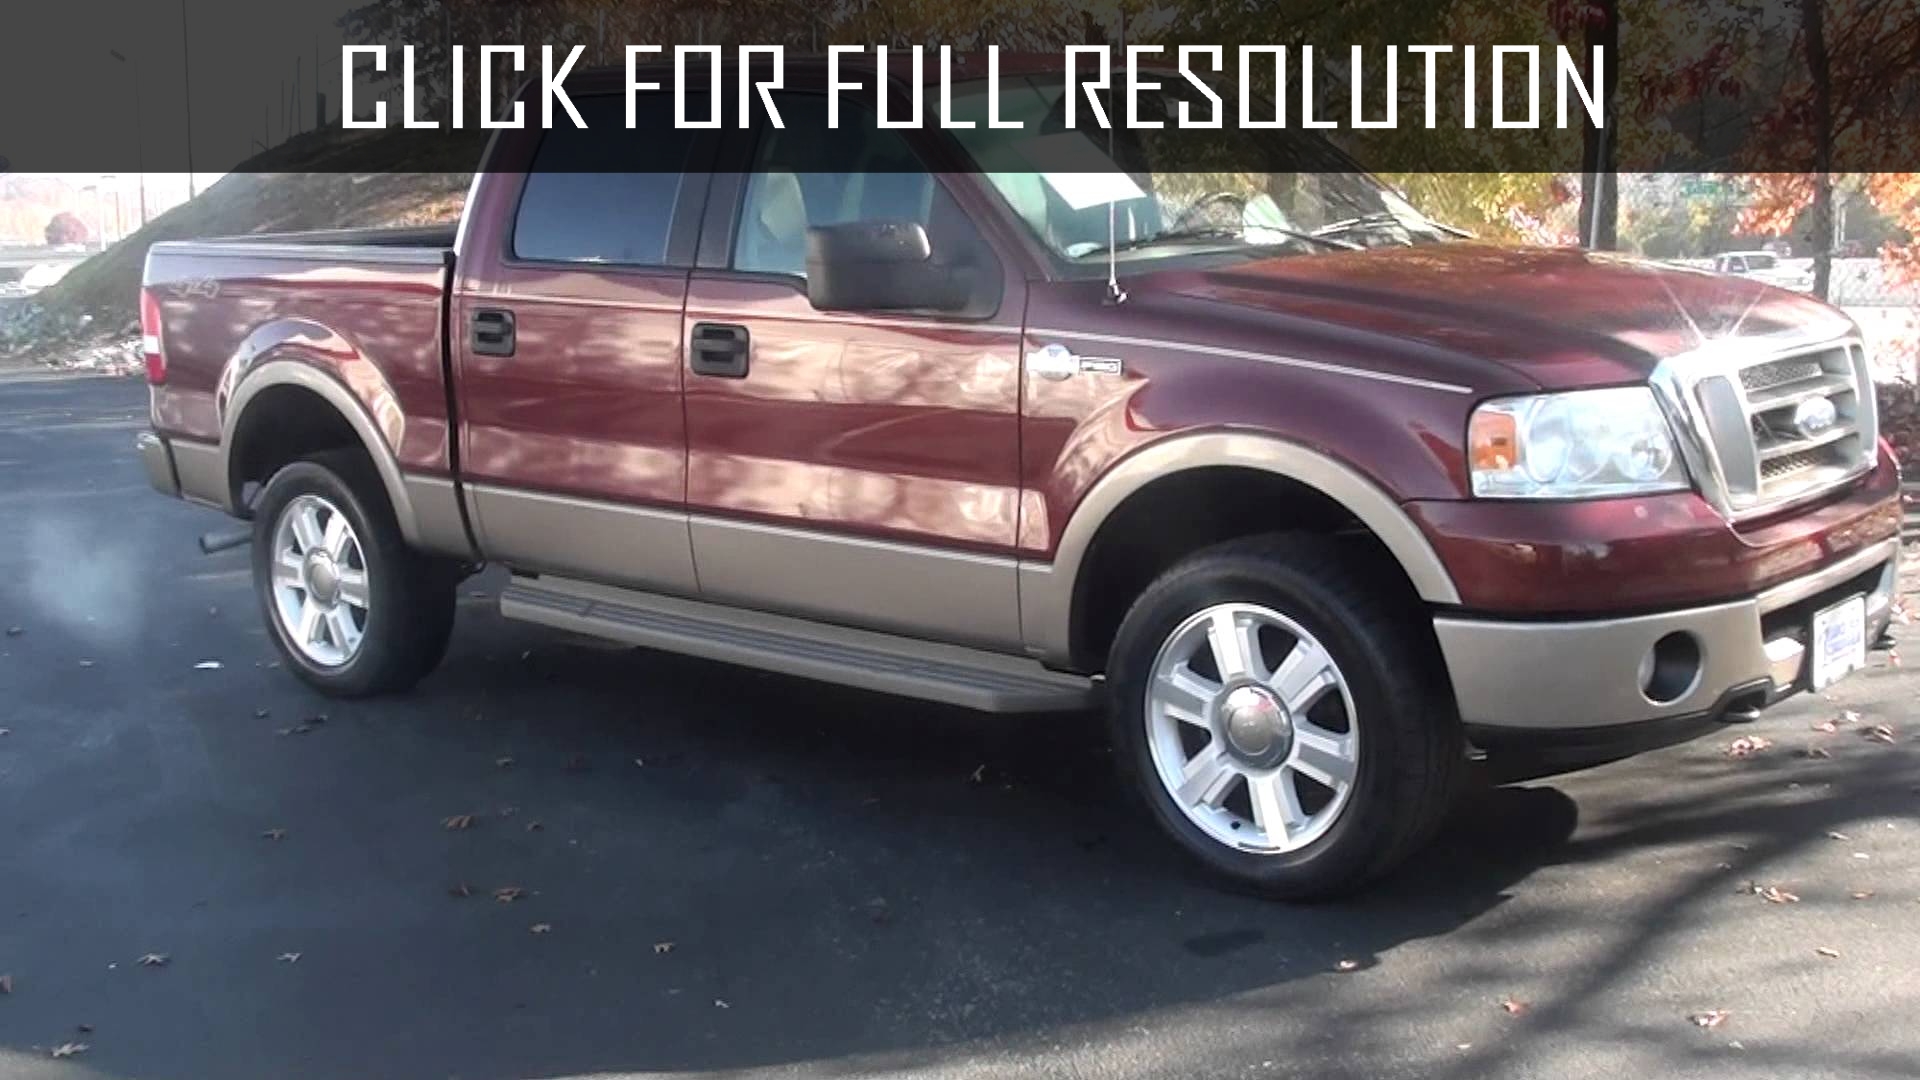 2004 Ford F150 King Ranch